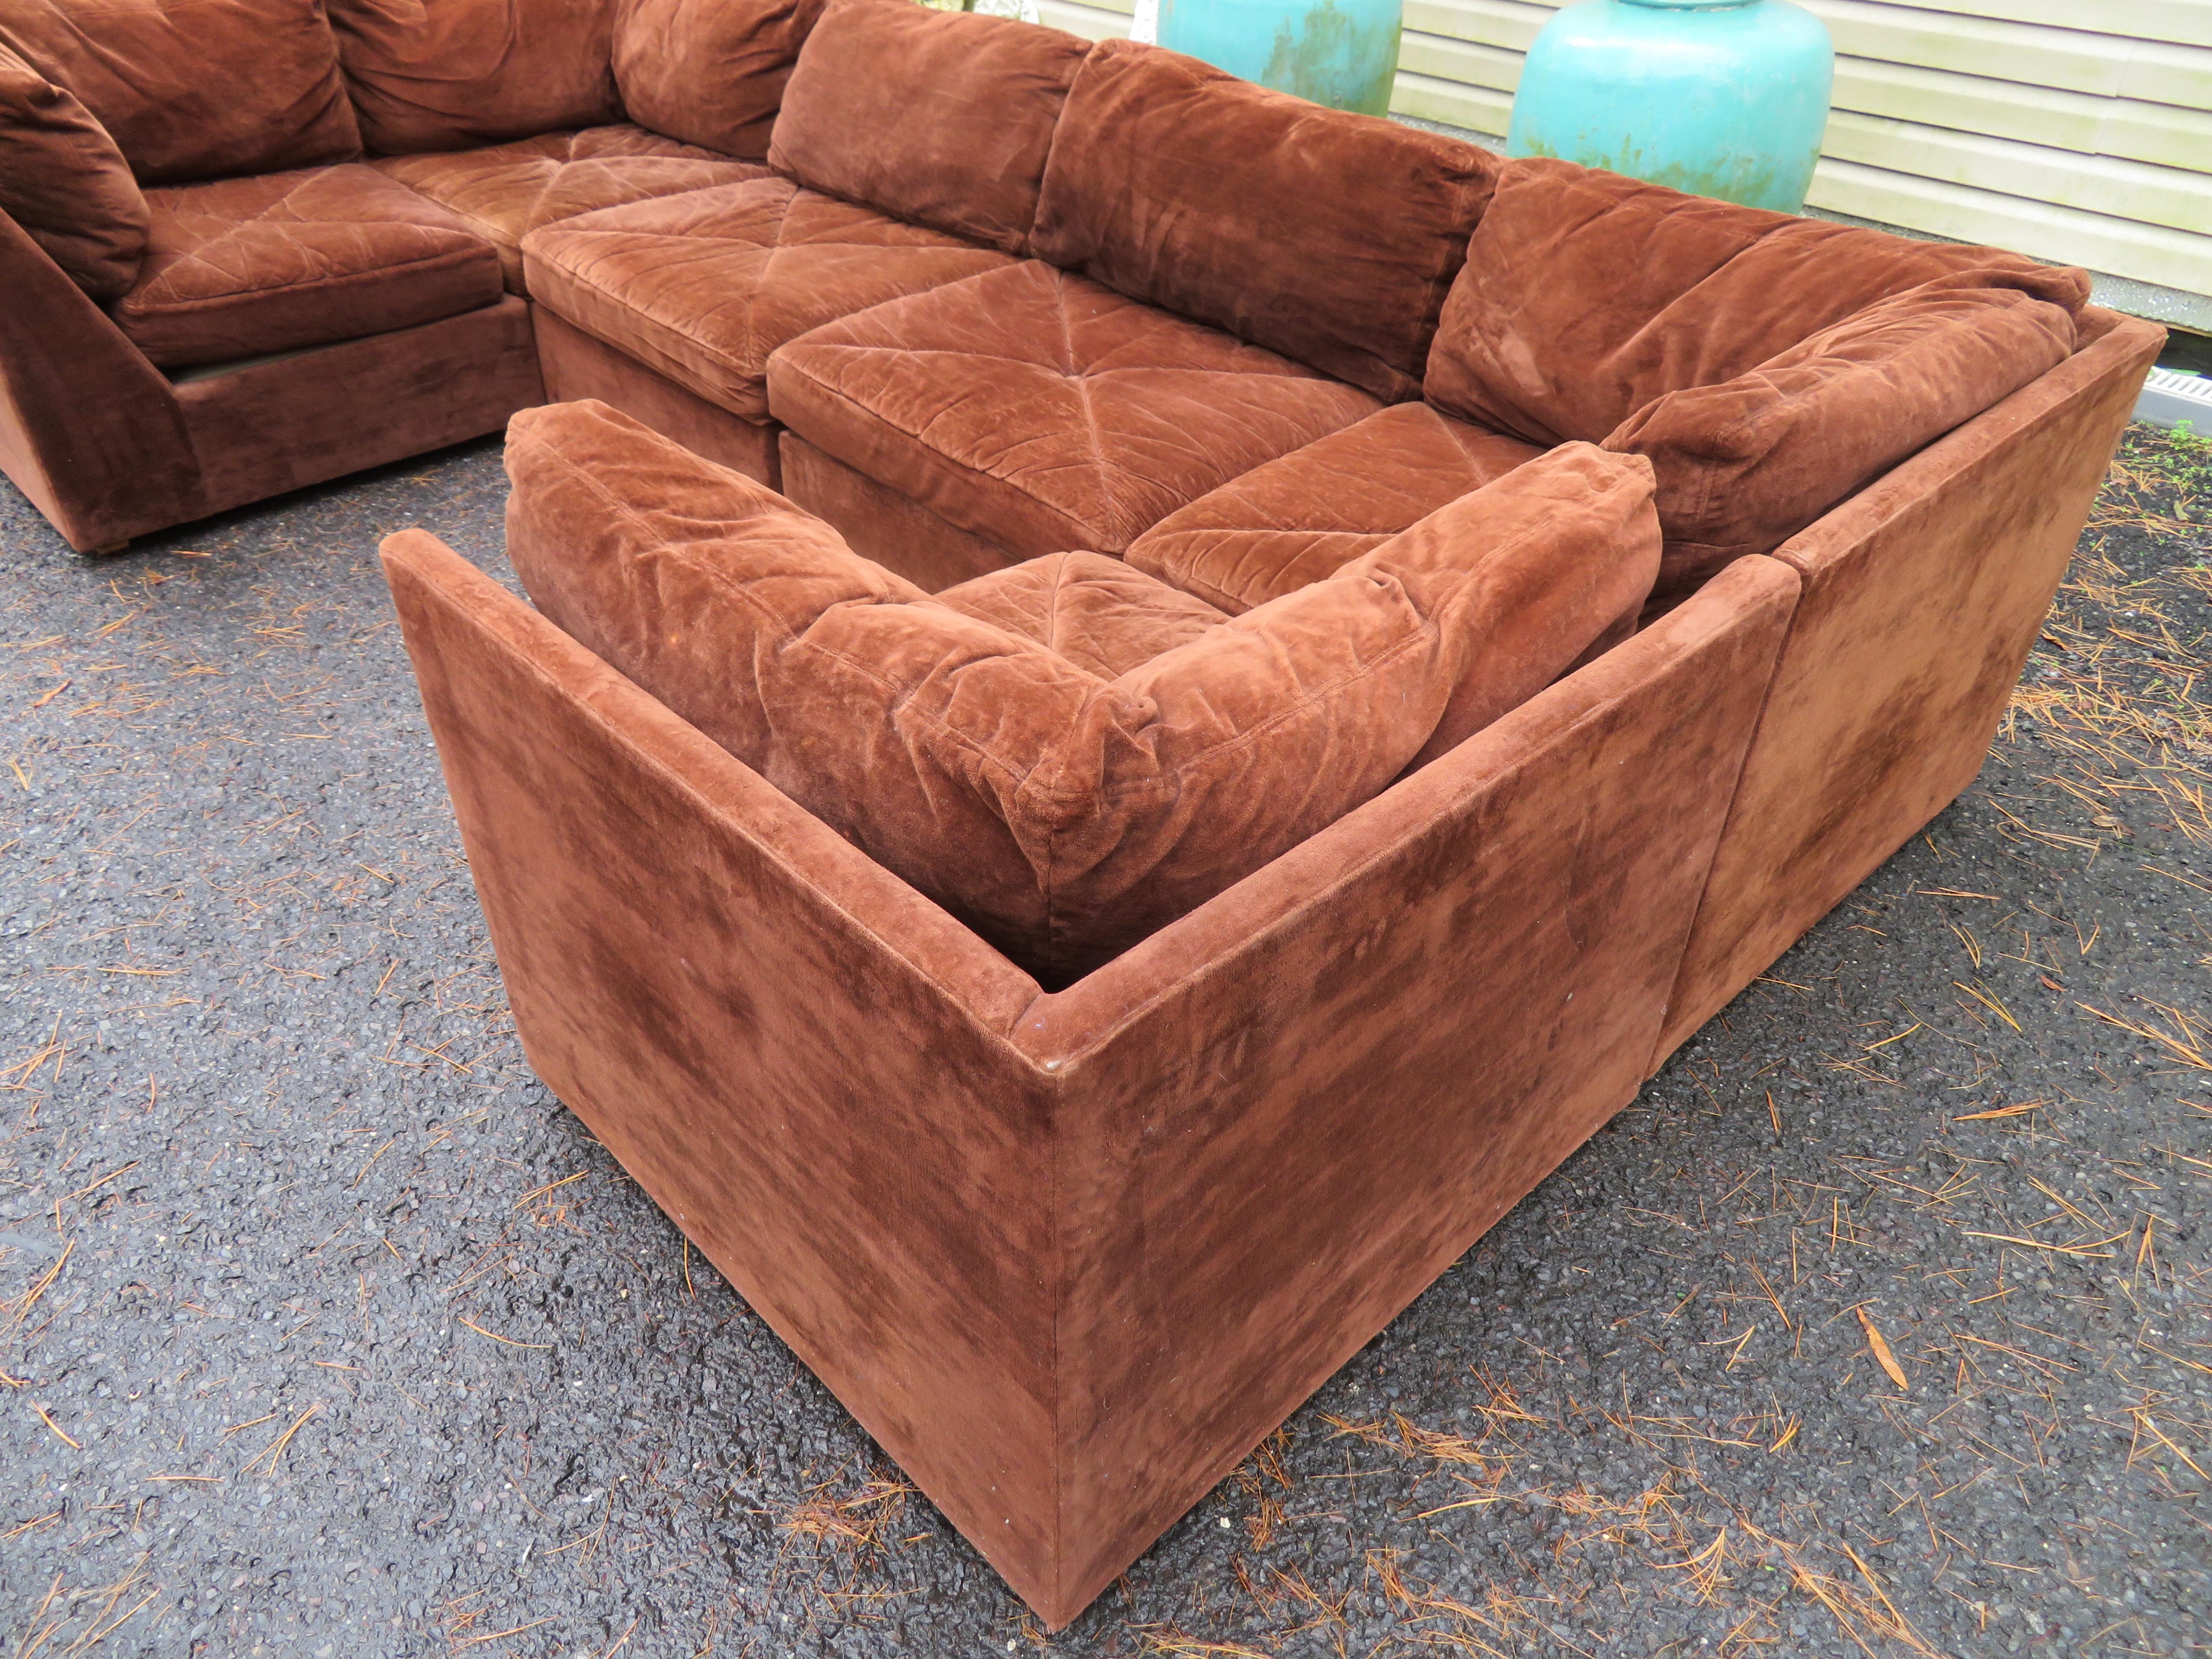 Wonderful 4 Piece Milo Baughman Style Cube Sectional Sofa Mid-Century Modern In Good Condition For Sale In Pemberton, NJ